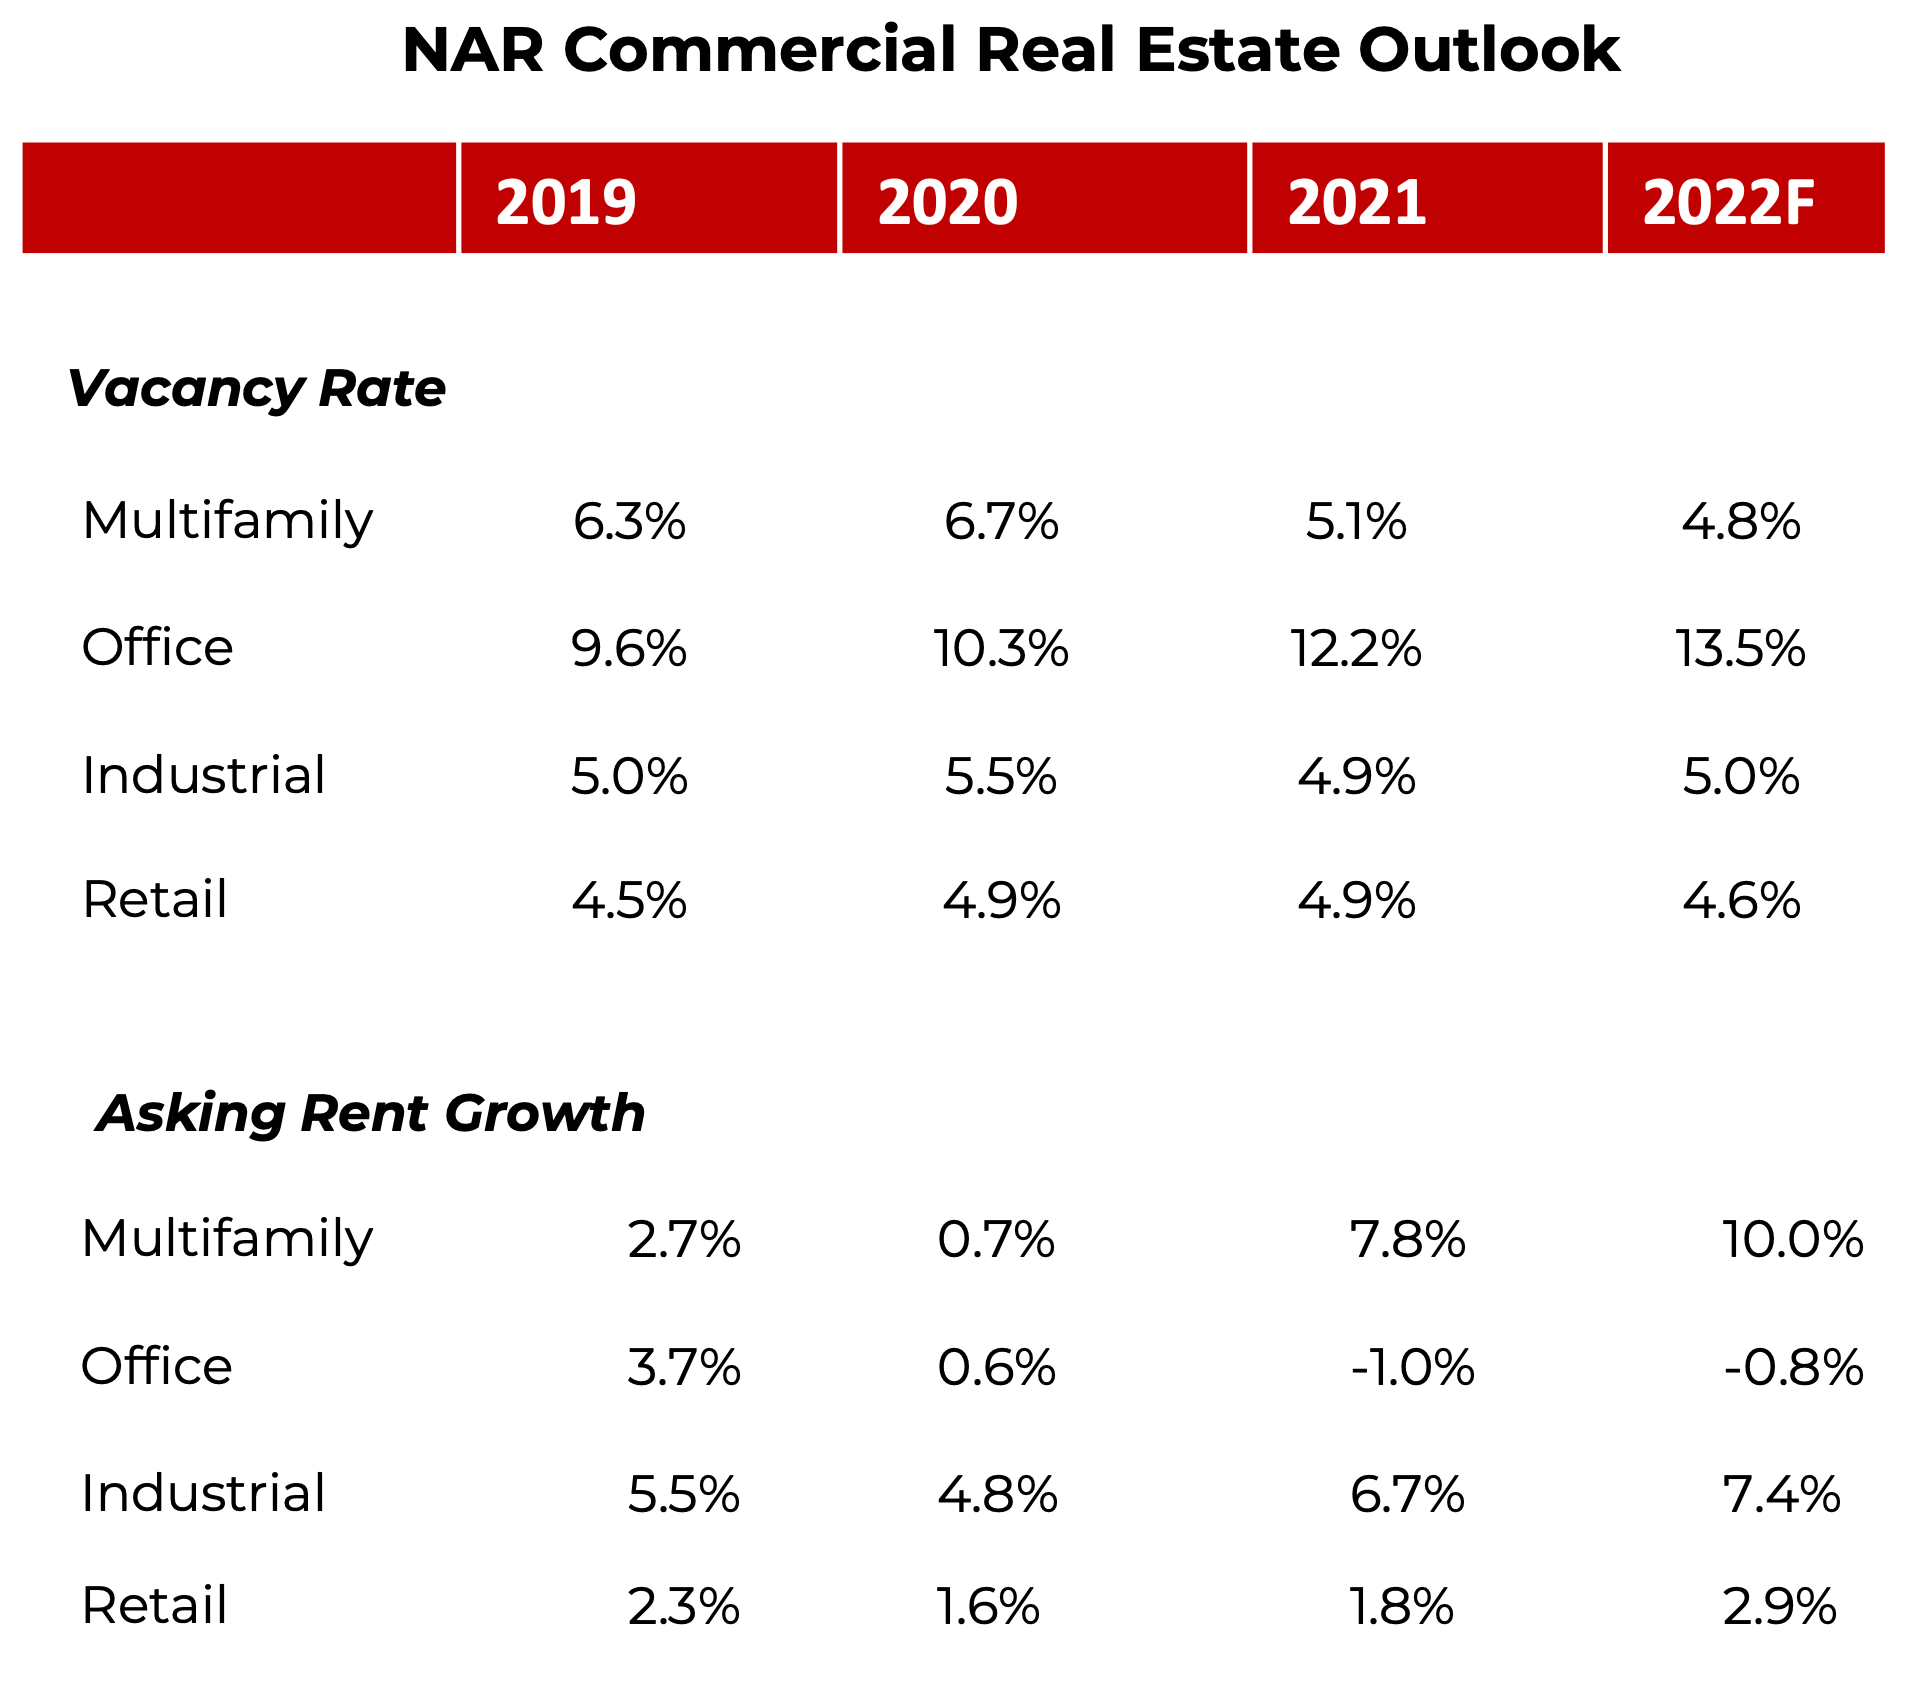 A table of vacancy rates and asking growth from 2019 to the start of 2022.